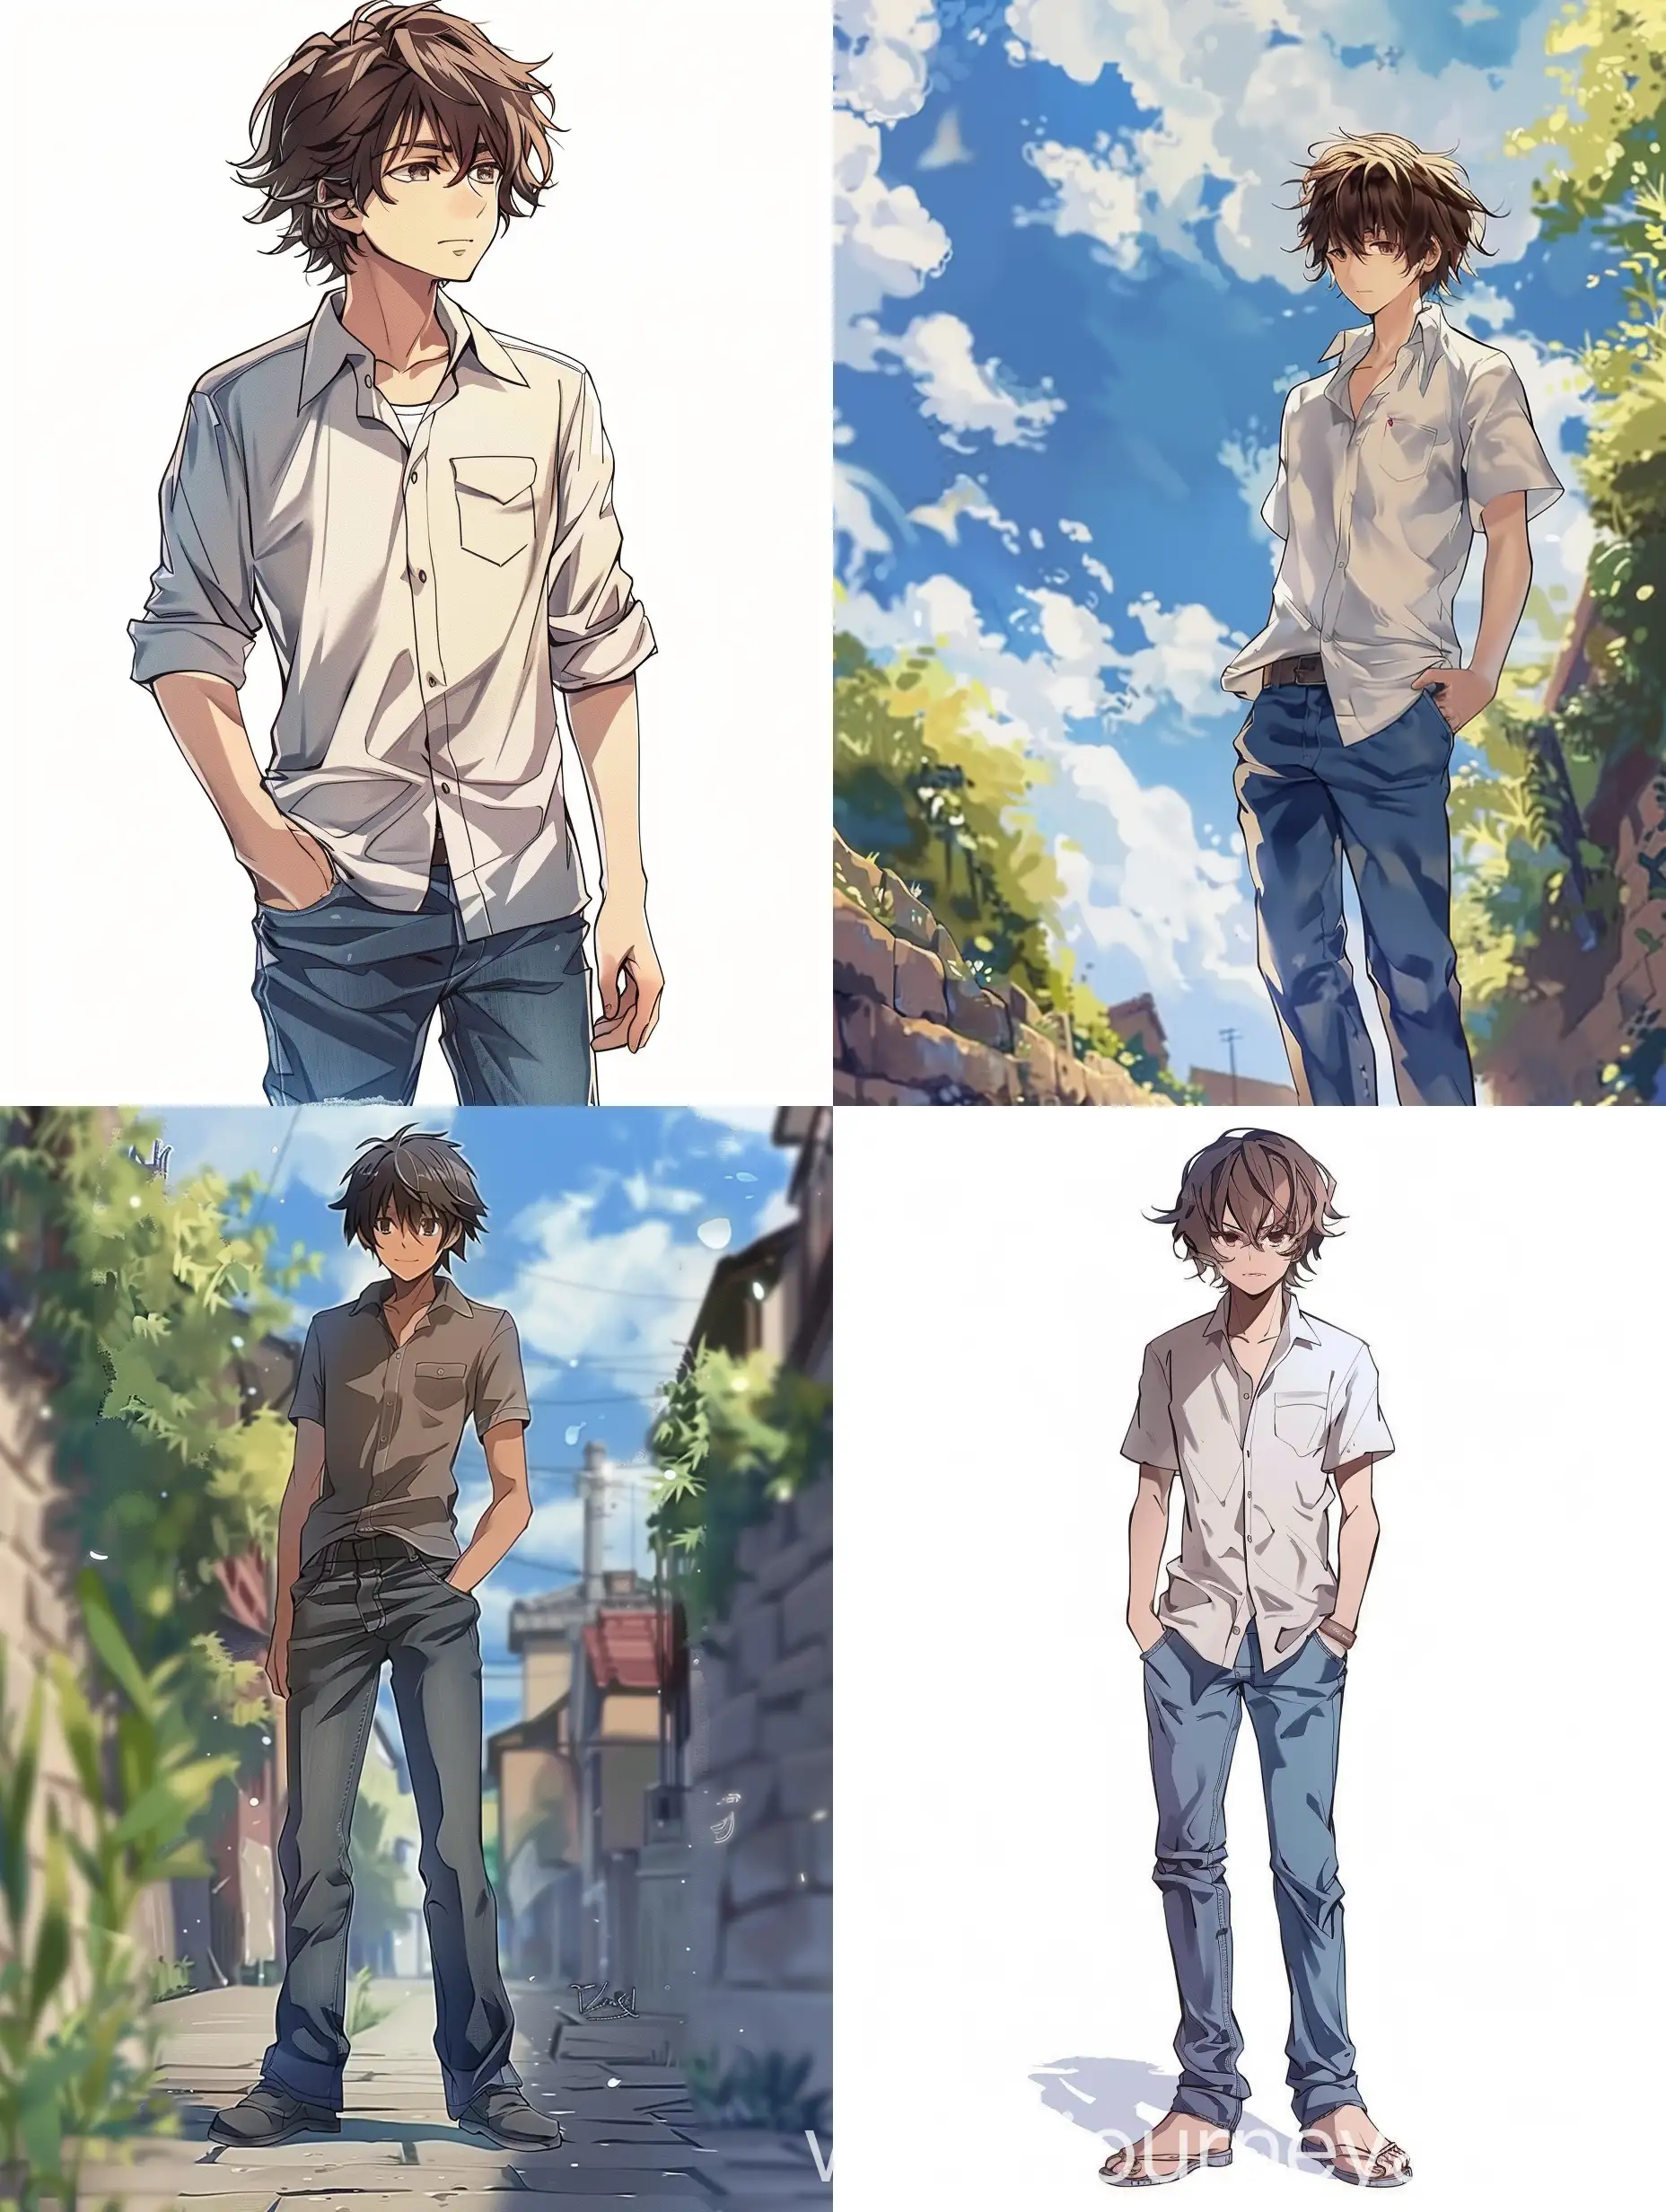 boy, 16 years old, shirt and jeans, anime style, in fantasy world, isekai.